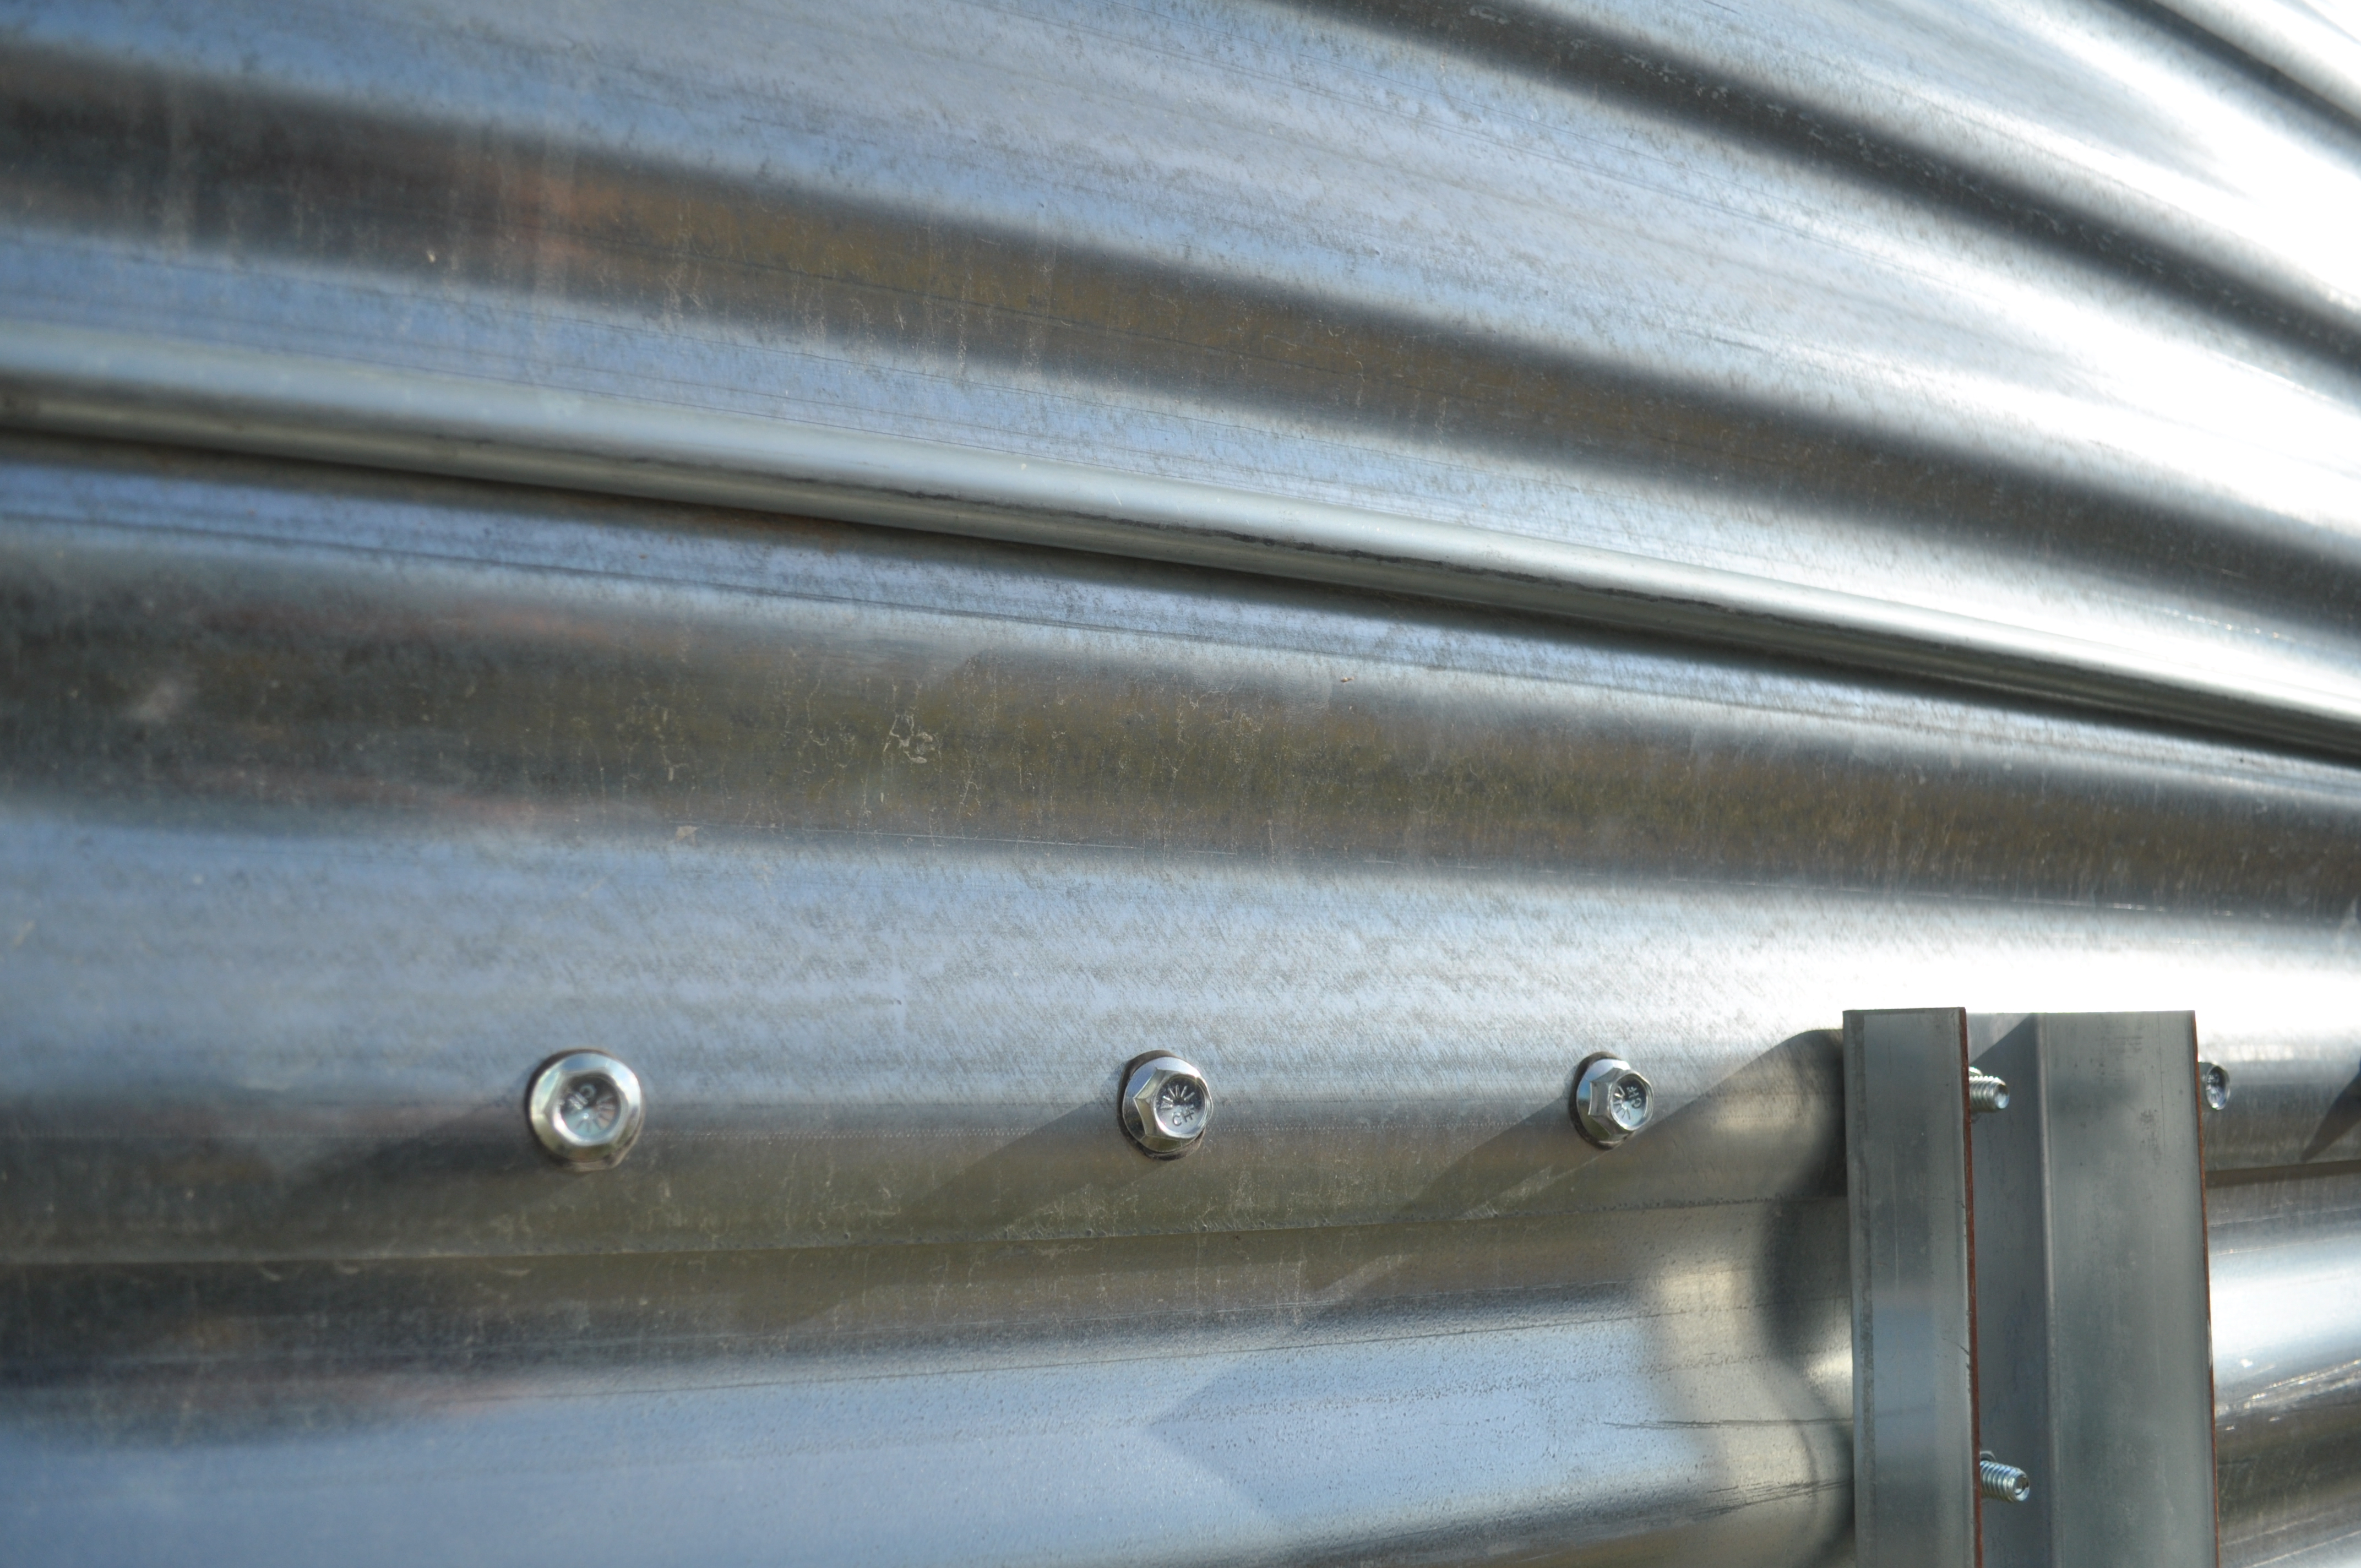 Narrow core bins have more ribs and more ridges for the grain to sit on which equates to more down pressure on the bin when the grain is flowing down. A wide core bin has fewer ridges, so there is less pressure when grain is flowing in. 